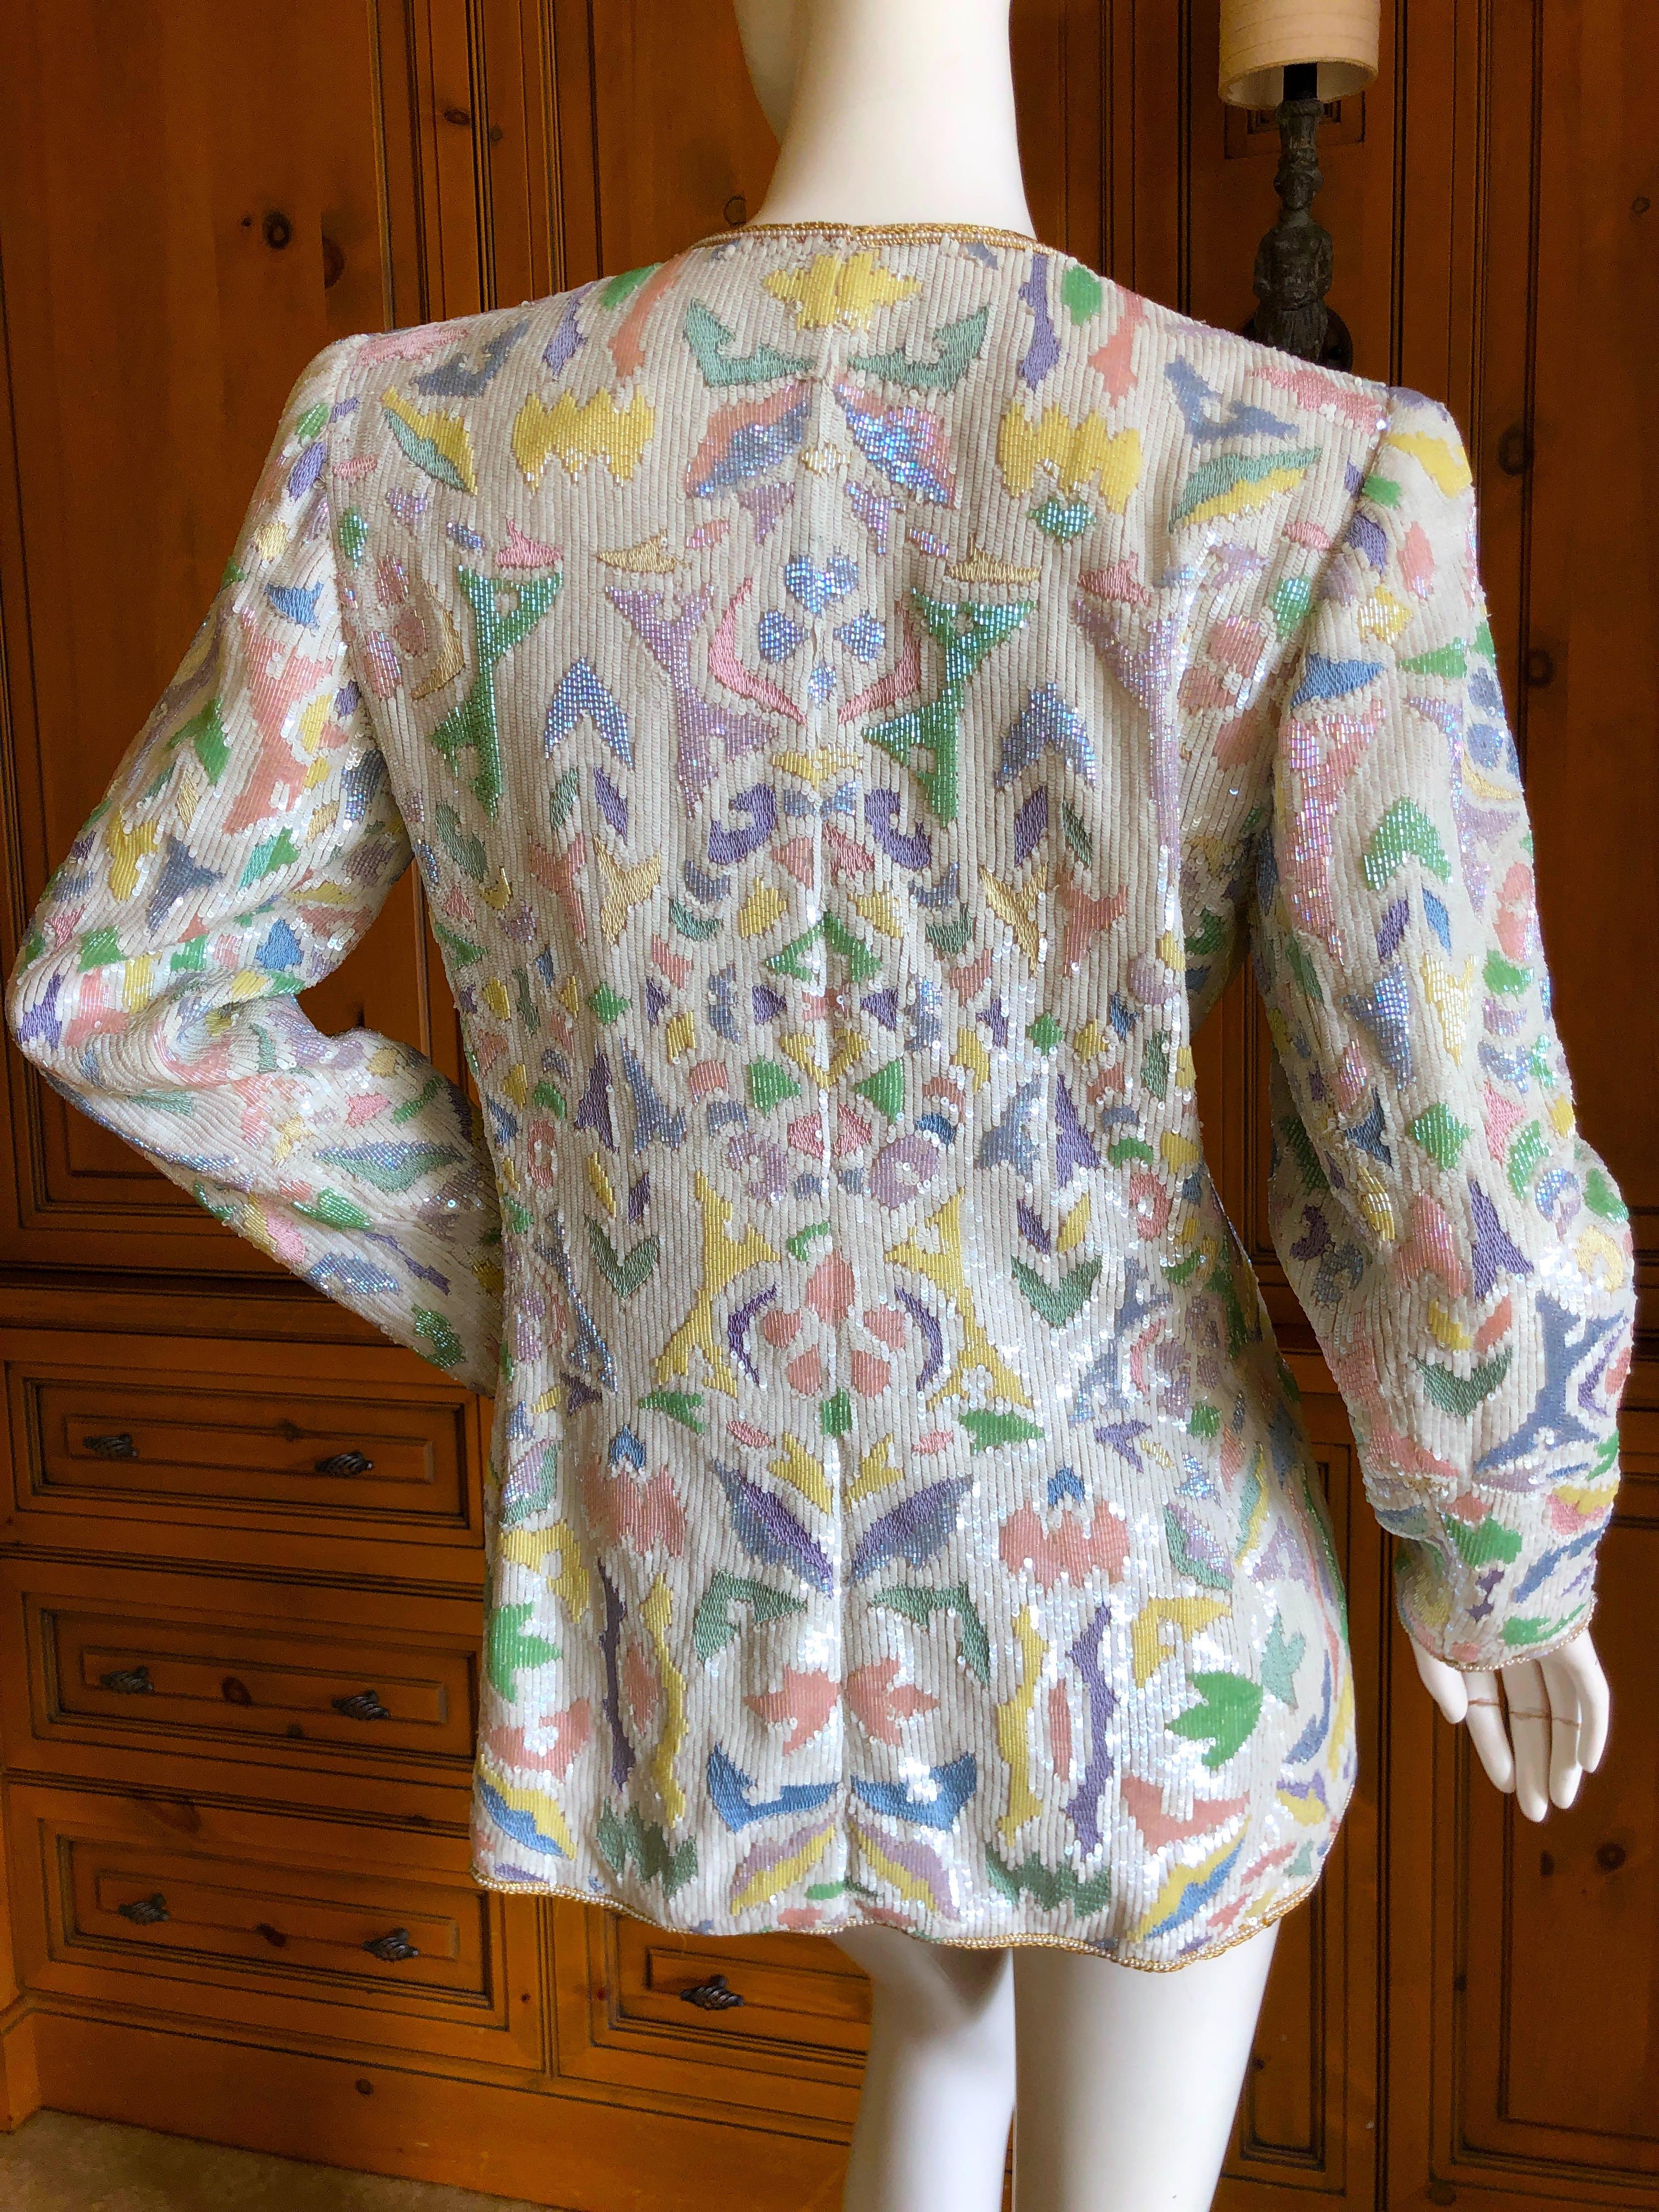 Oscar de la Renta 1980's Pastel Sequin and Pearl Embellished Evening Jacket.
Please use the zoom feature to see all the amazing hand work that went in to creating this.
Marked size 6
Bust 38